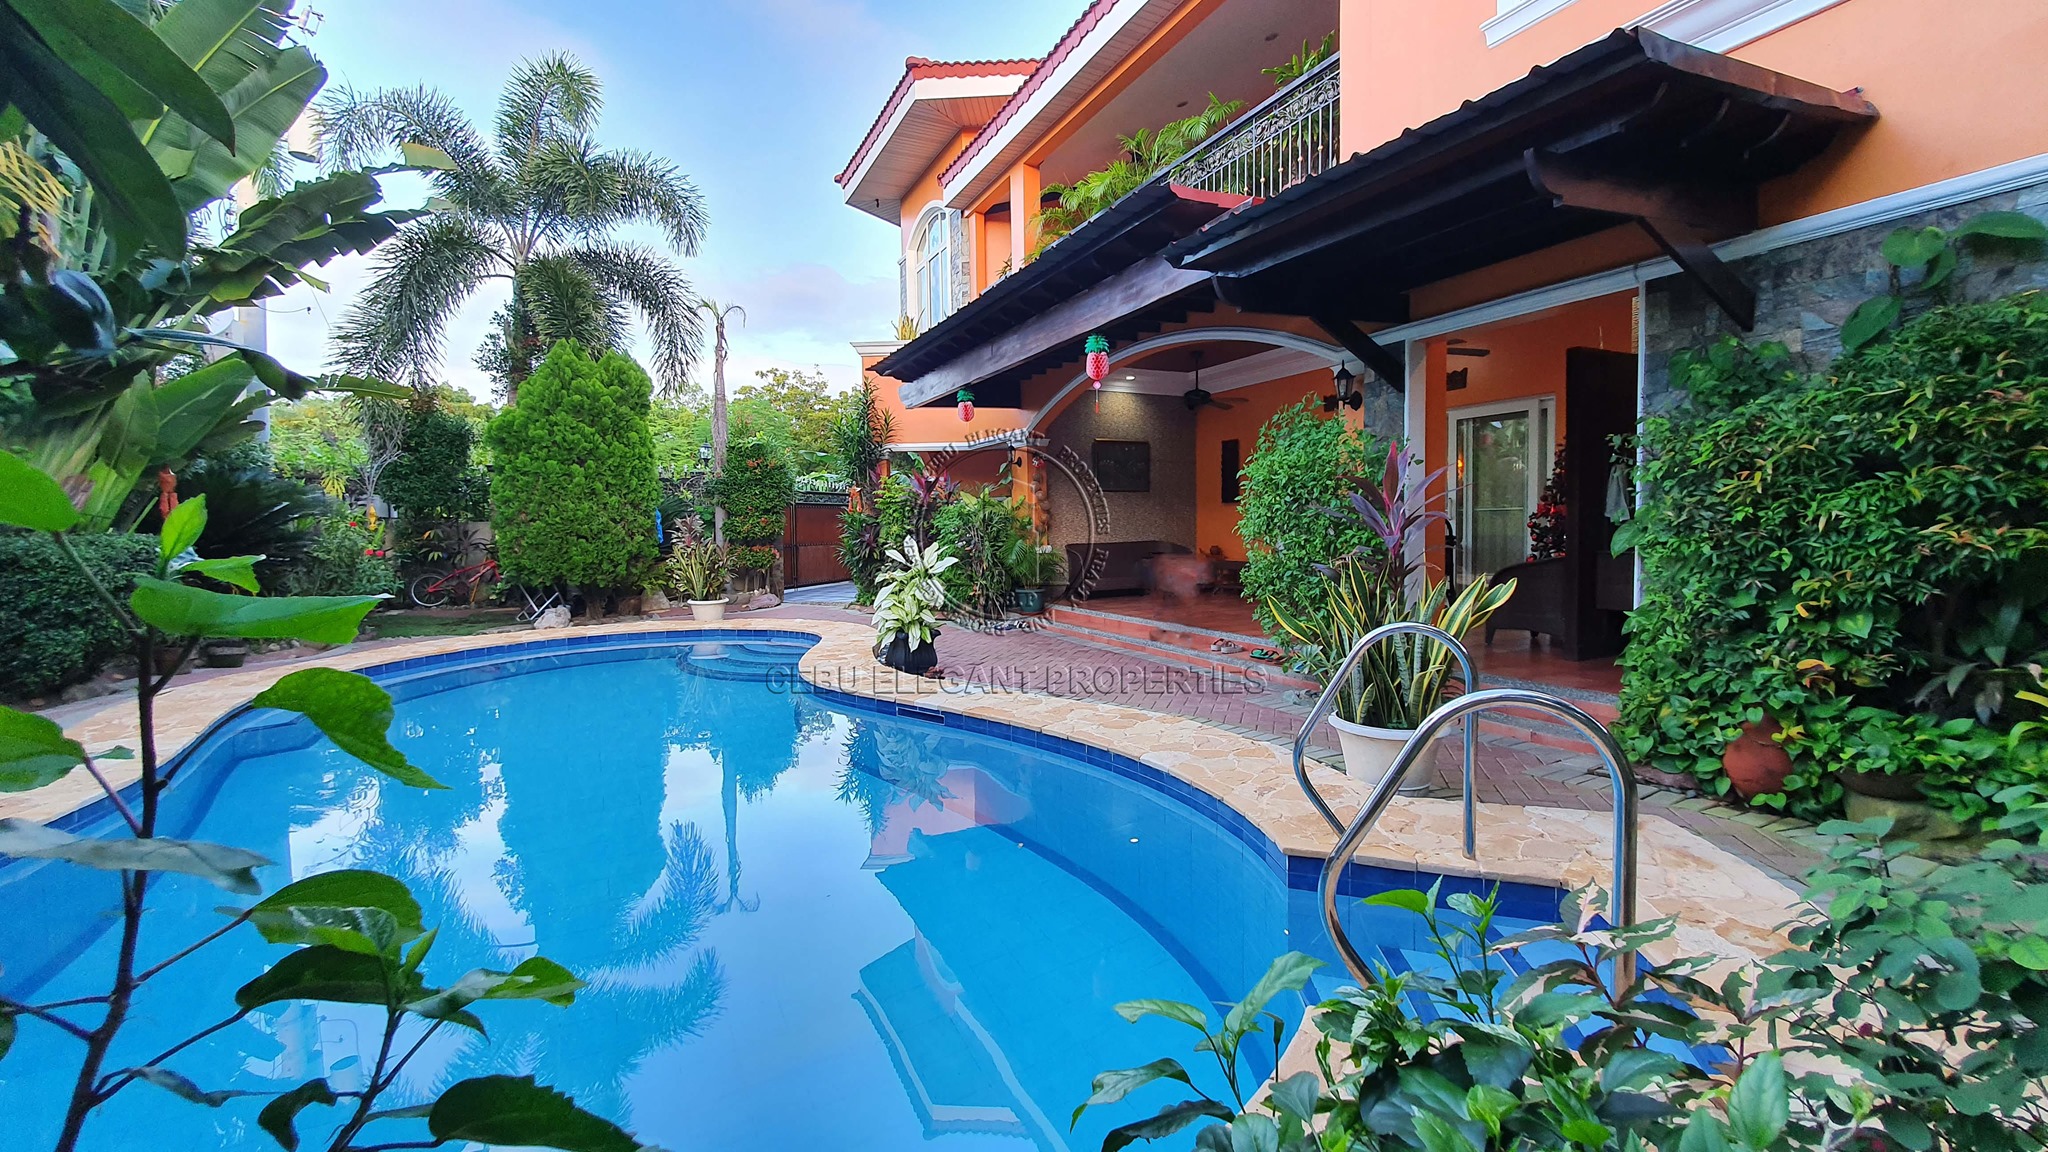 5 Bedroom House and lot for Sale with a Pool in Lapu-Lapu, Cebu